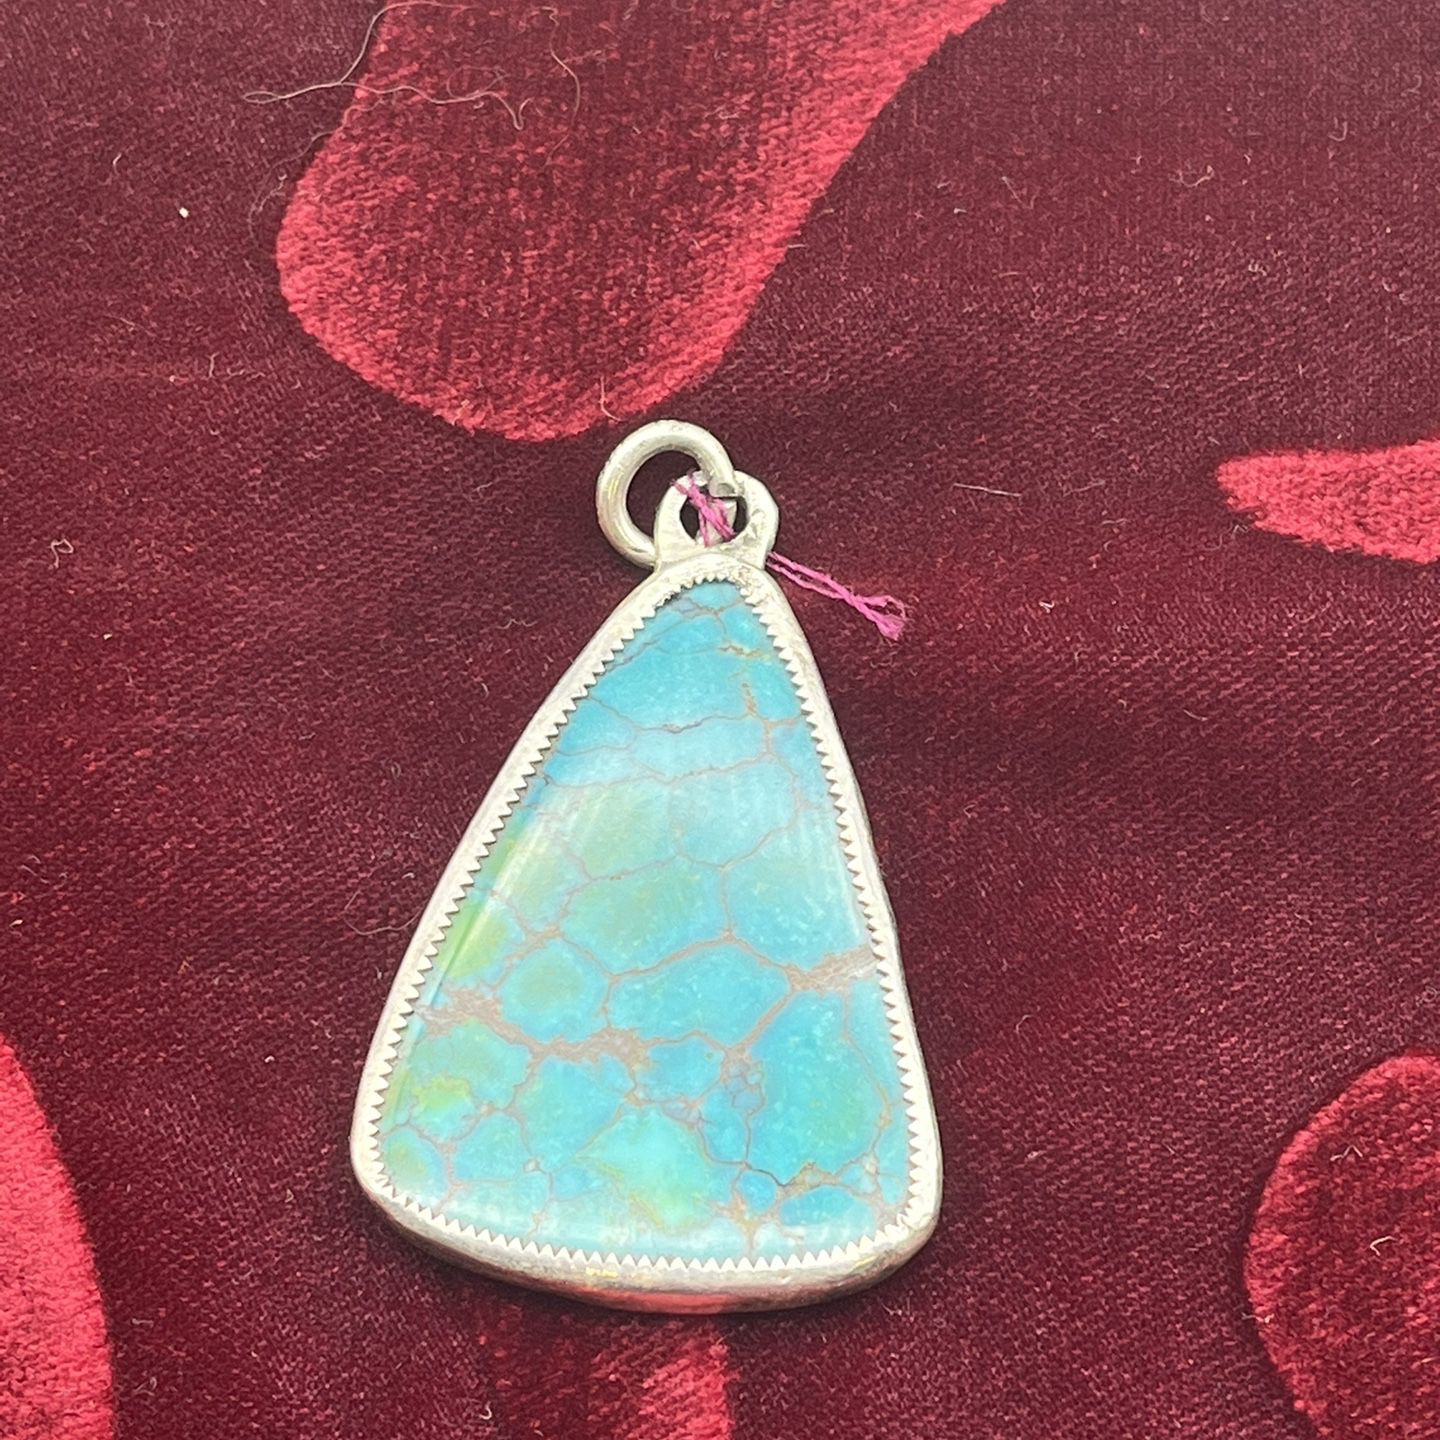 Turquoise & 925 Sterling Silver Pendant